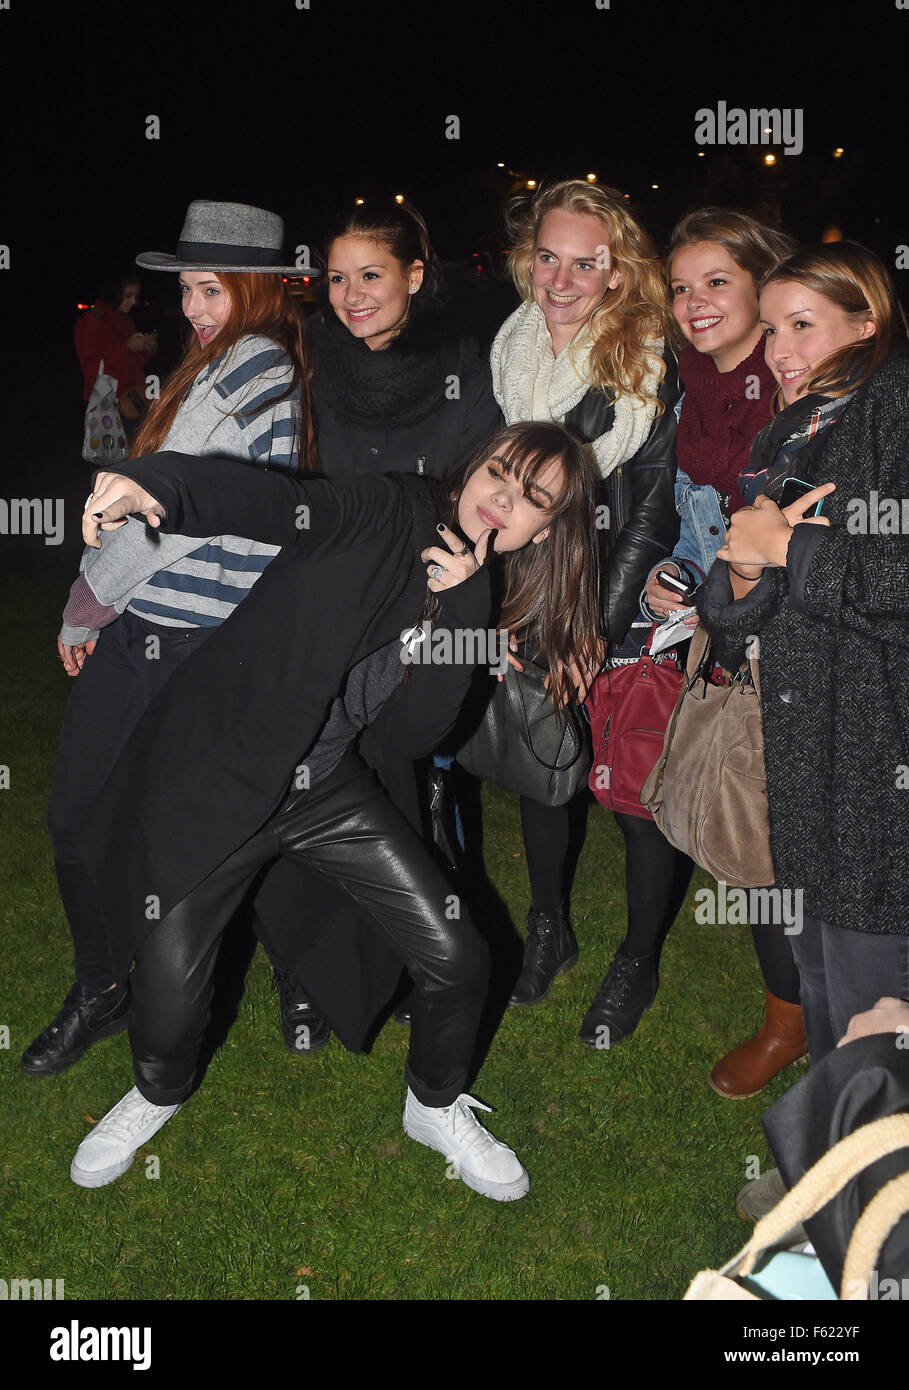 Sophie Turner and Hailee Steinfeld seen attending a meet and greet with fans  in Hyde Park London. The Game of Thrones star Sophie and Musician Hailee  seen running through Hyde Park laughing